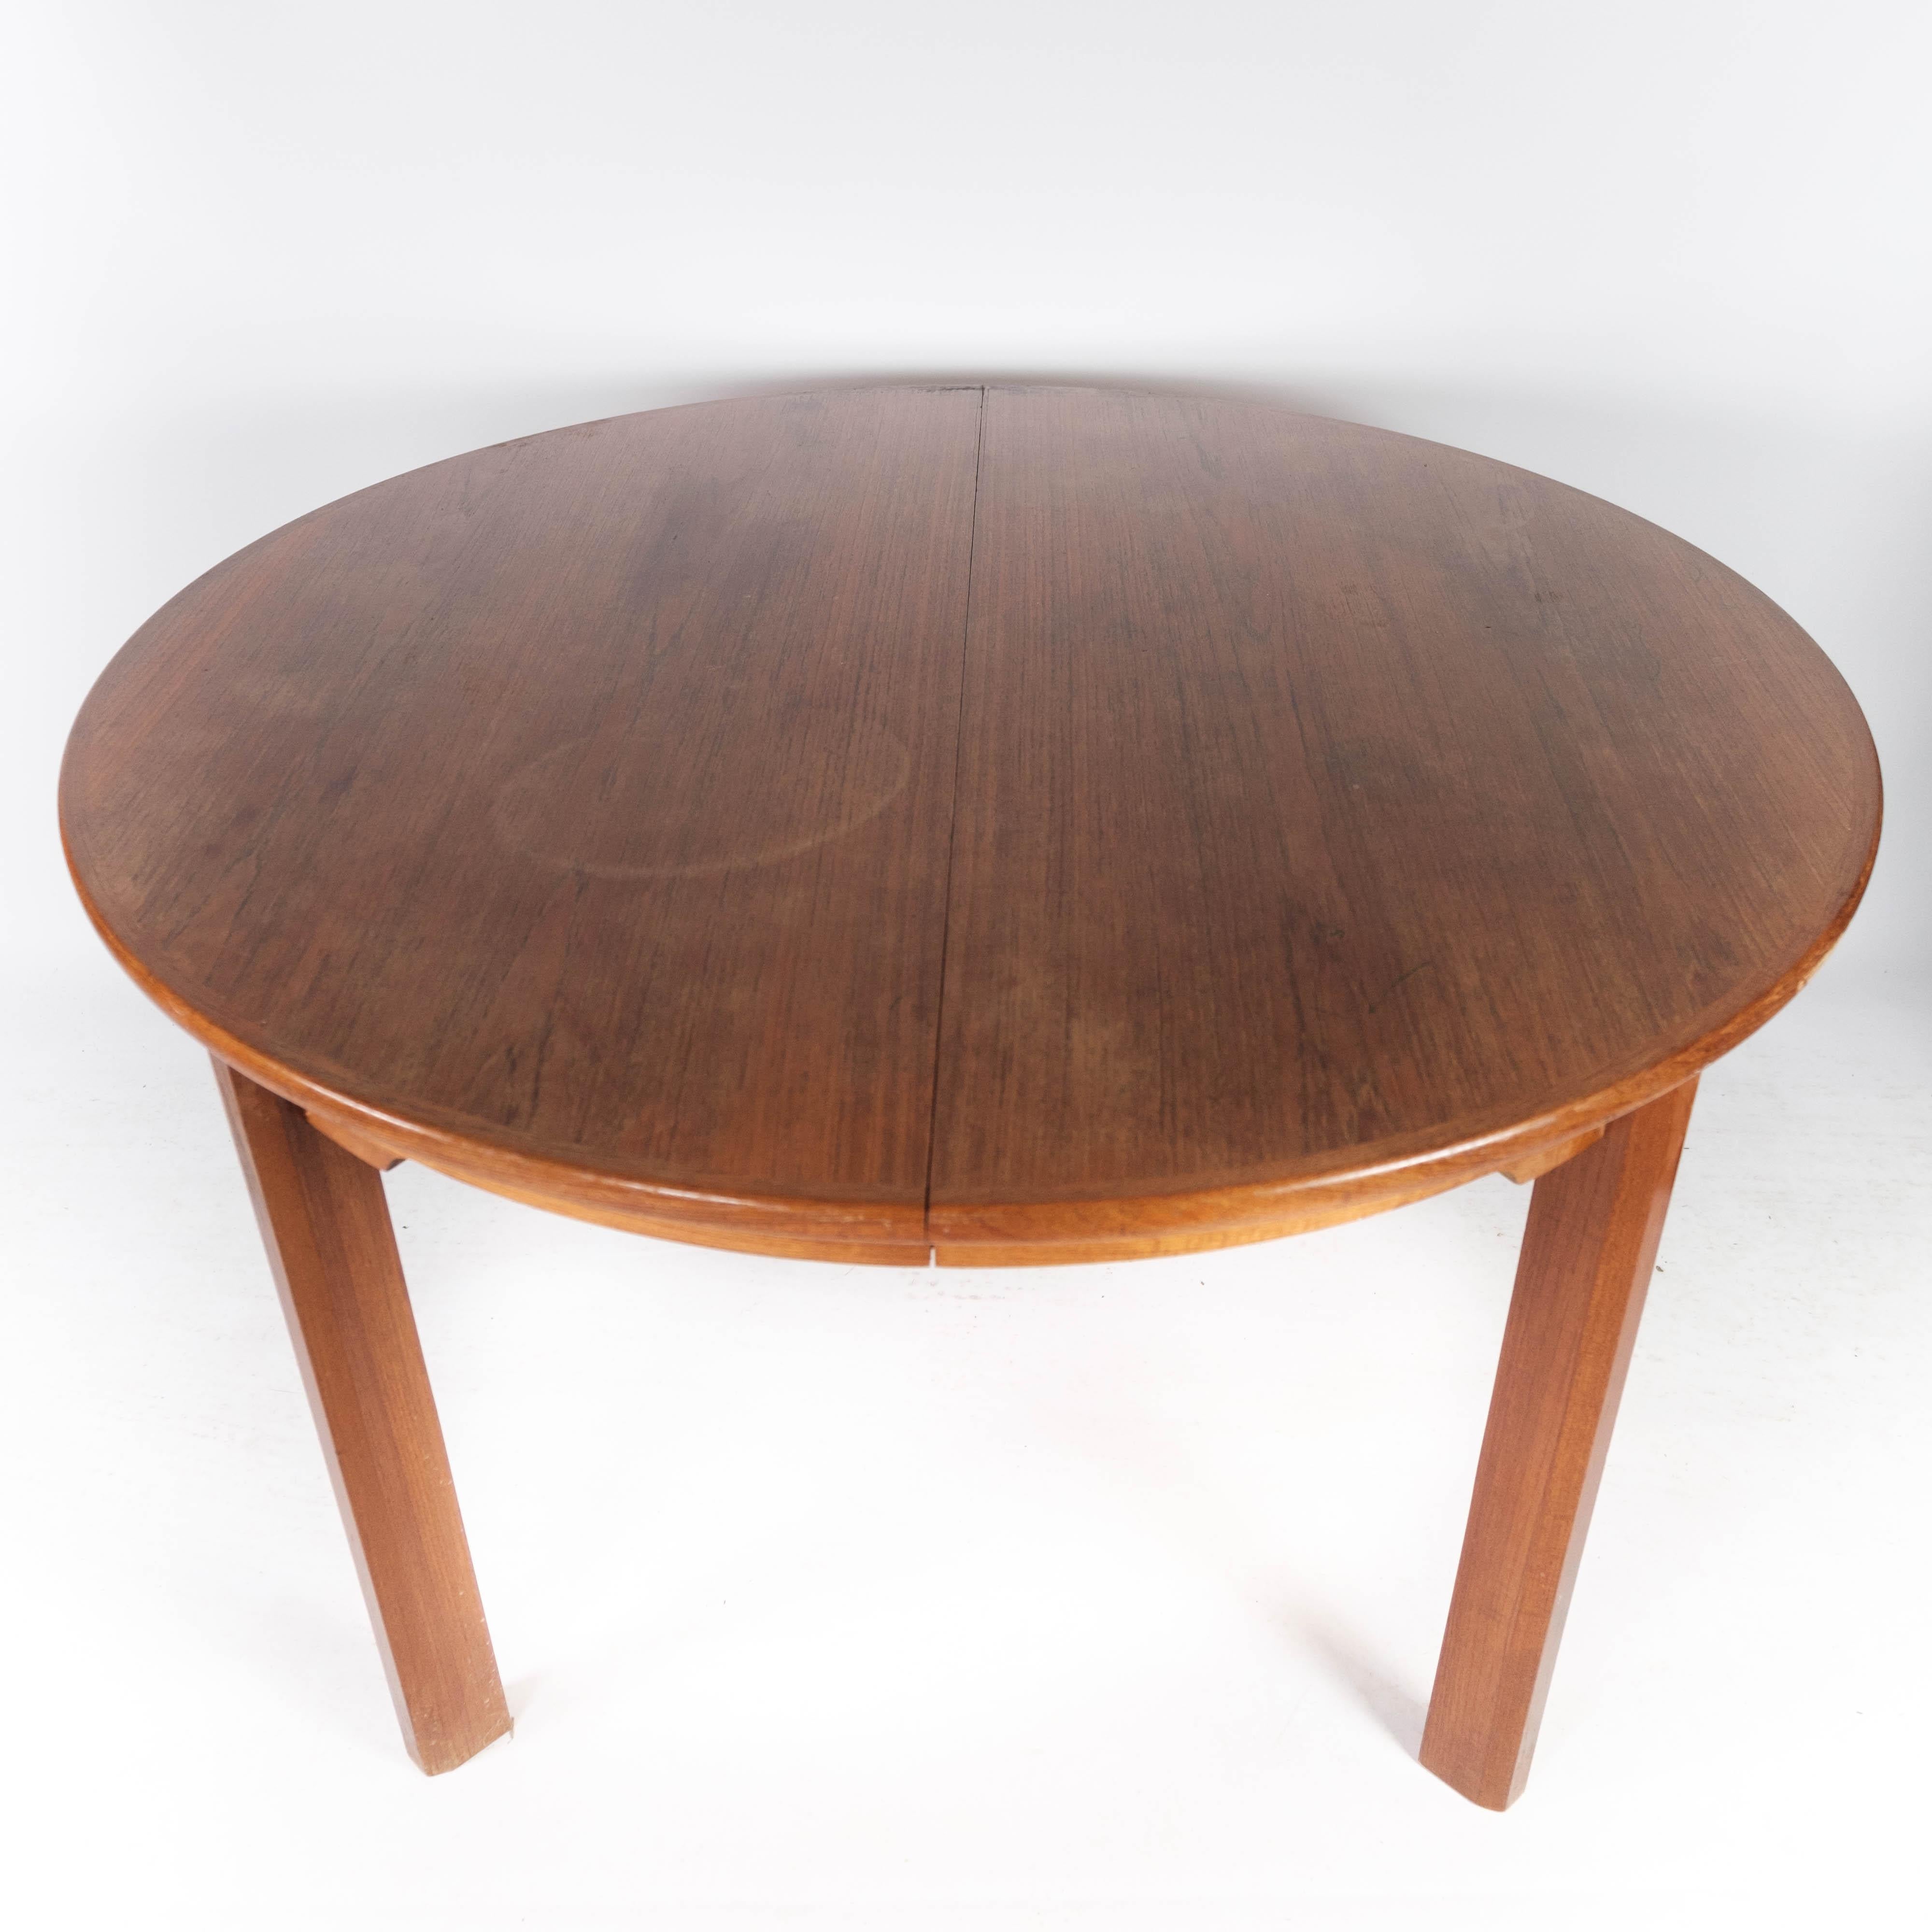 
This dining table in teak, showcasing Danish design from the 1960s, is a timeless piece that combines elegance with functionality. Crafted with meticulous attention to detail, it epitomizes the mid-century modern aesthetic.

The warm tones and